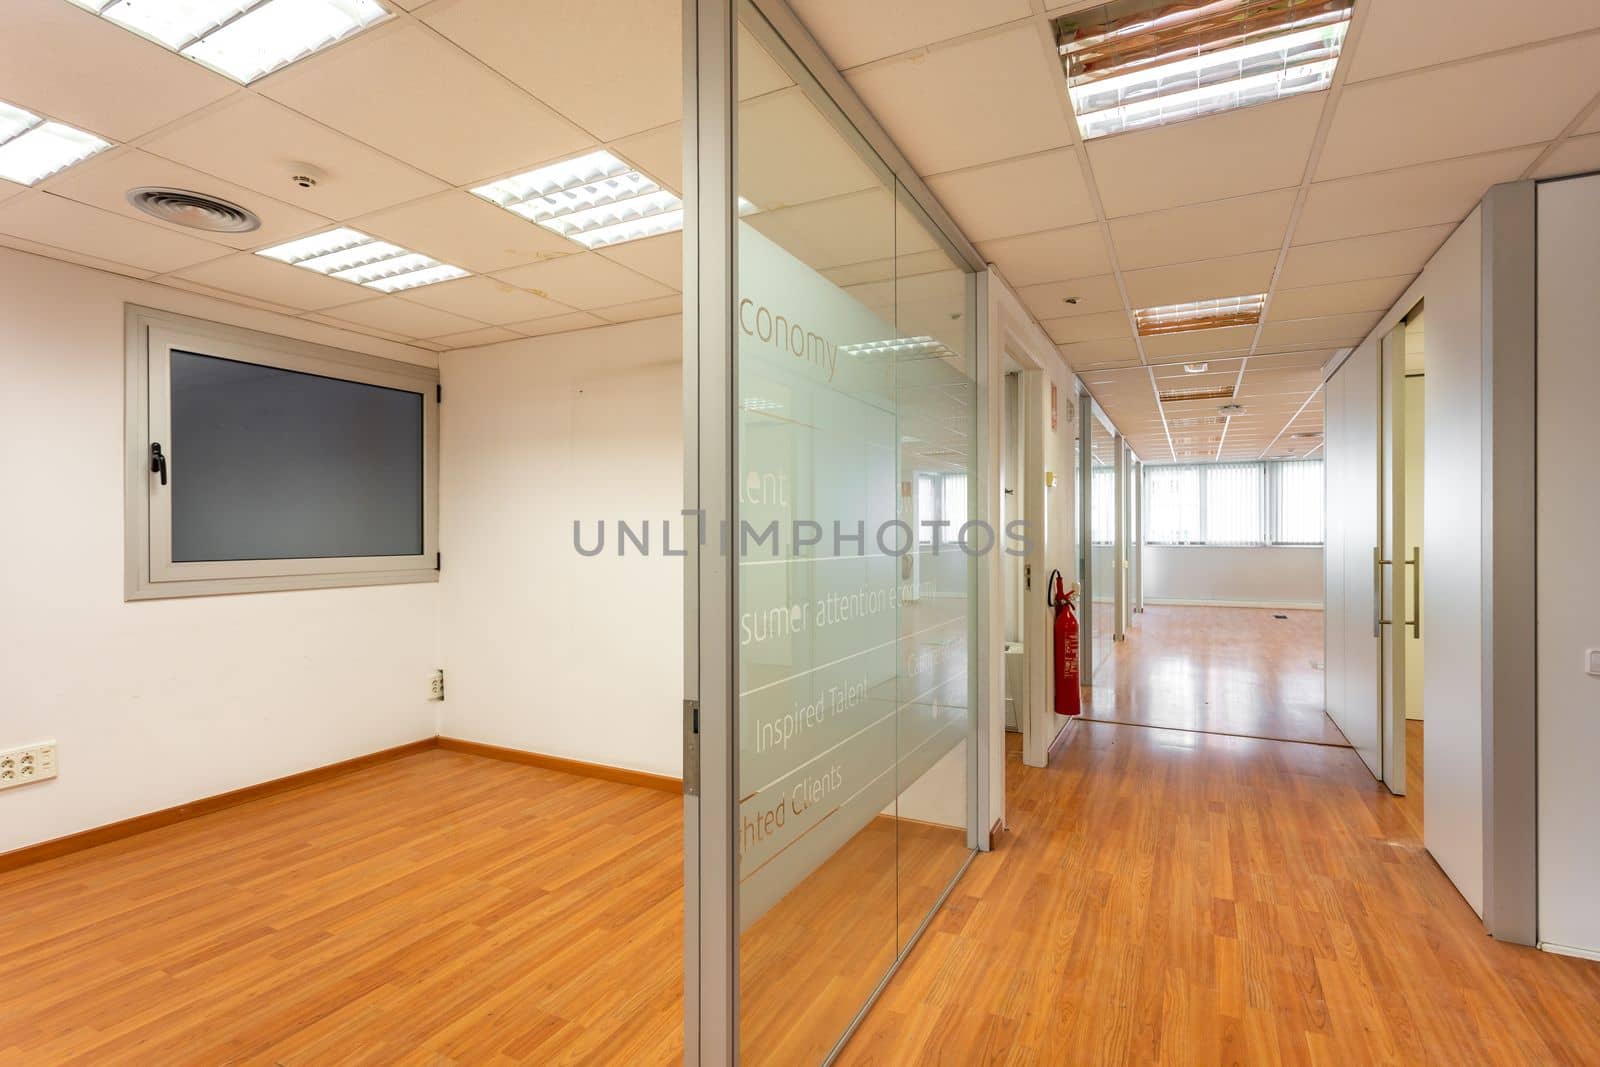 Glass partition enclosing empty office room from corridor with window at end. Outdated design of office corridor and room that needs to be renovated. Burnt out fluorescent lamps in empty office space. by apavlin